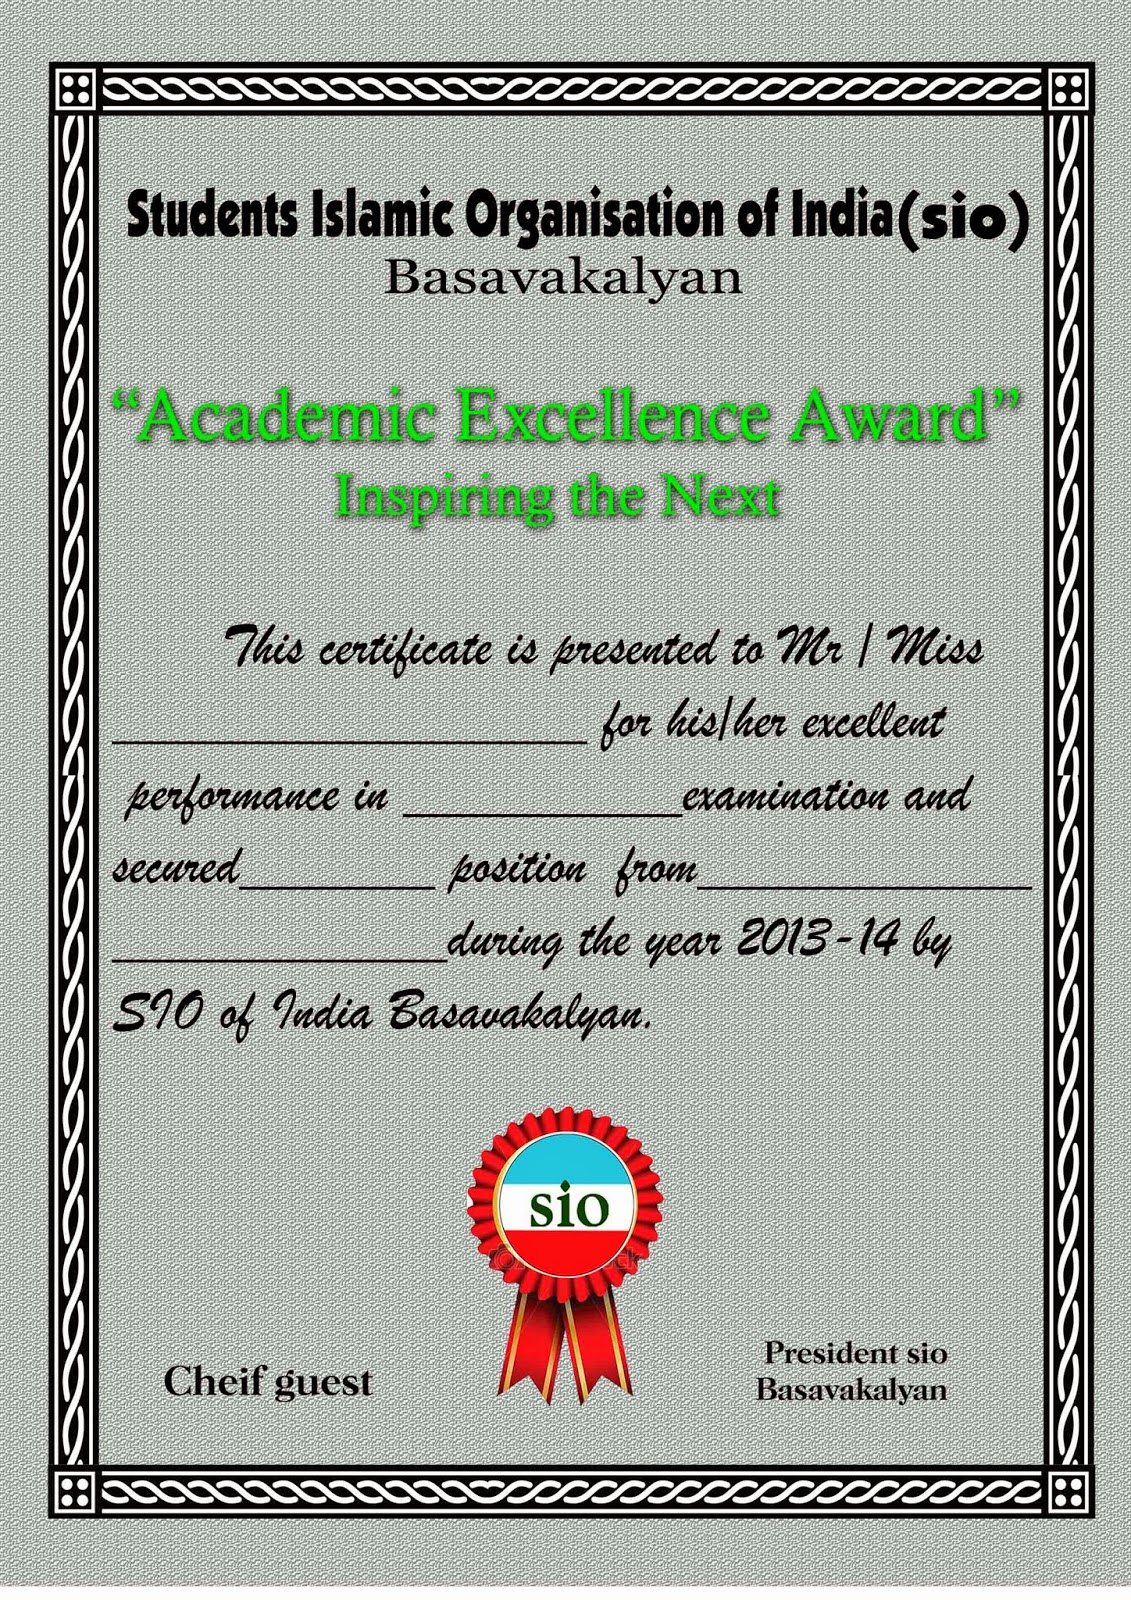 Sio Basavakalyan Unit: Certificate For Academic Excellence Award throughout Academic Excellence Certificate